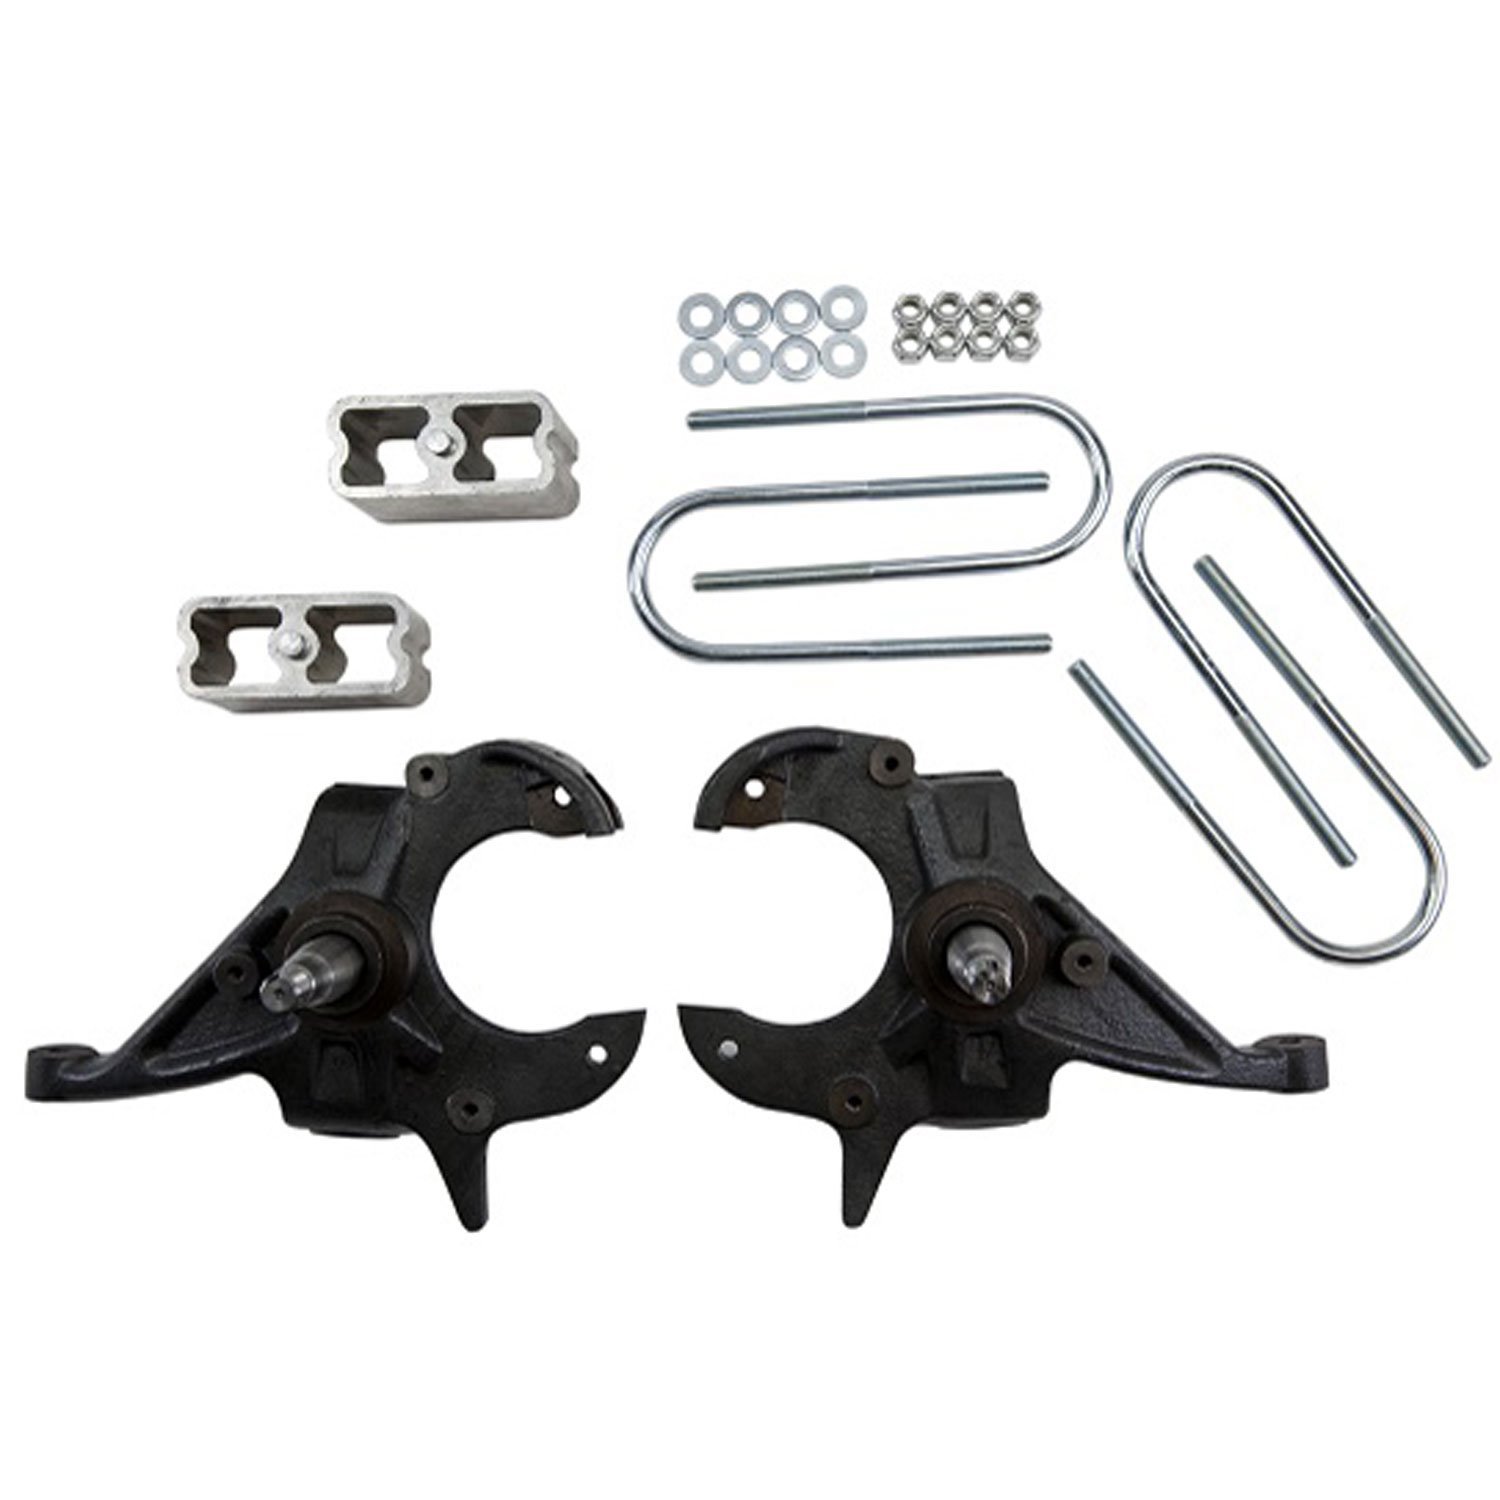 Complete Lowering Kit for 1982-2004 Chevy S10/GMC S15 Extended Cab